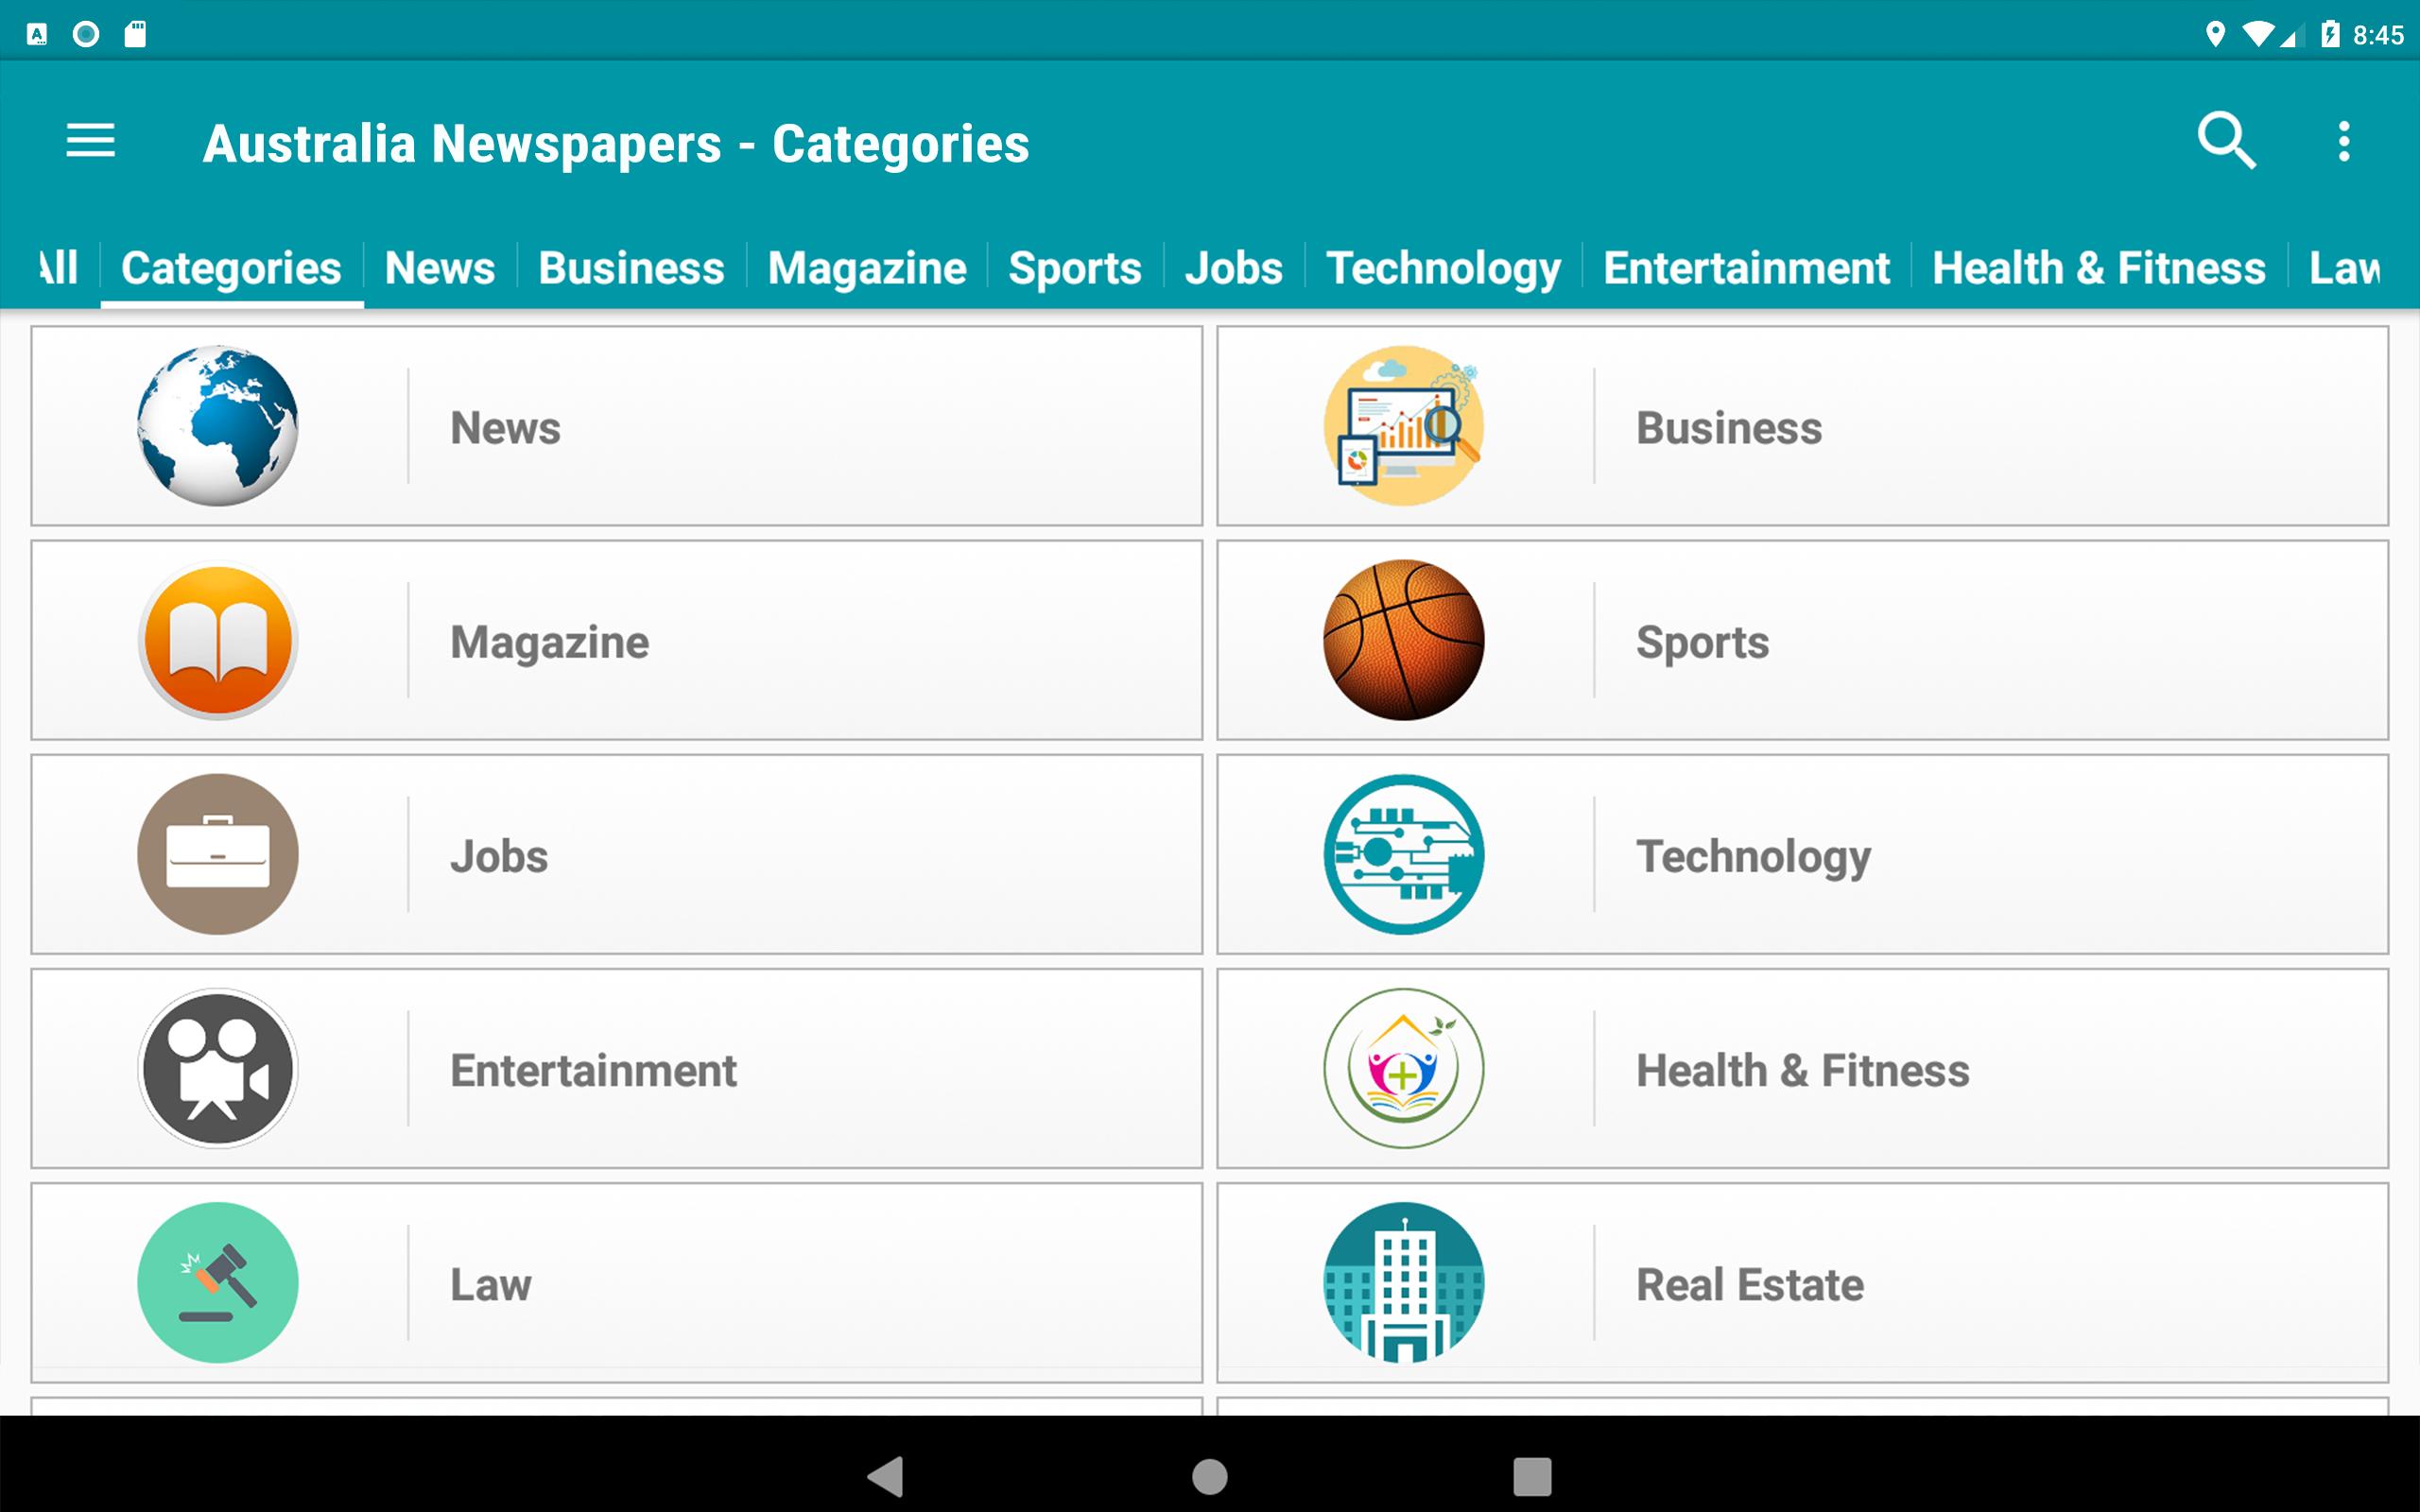 Australian News - Australia Newspapers App for Android - APK Download